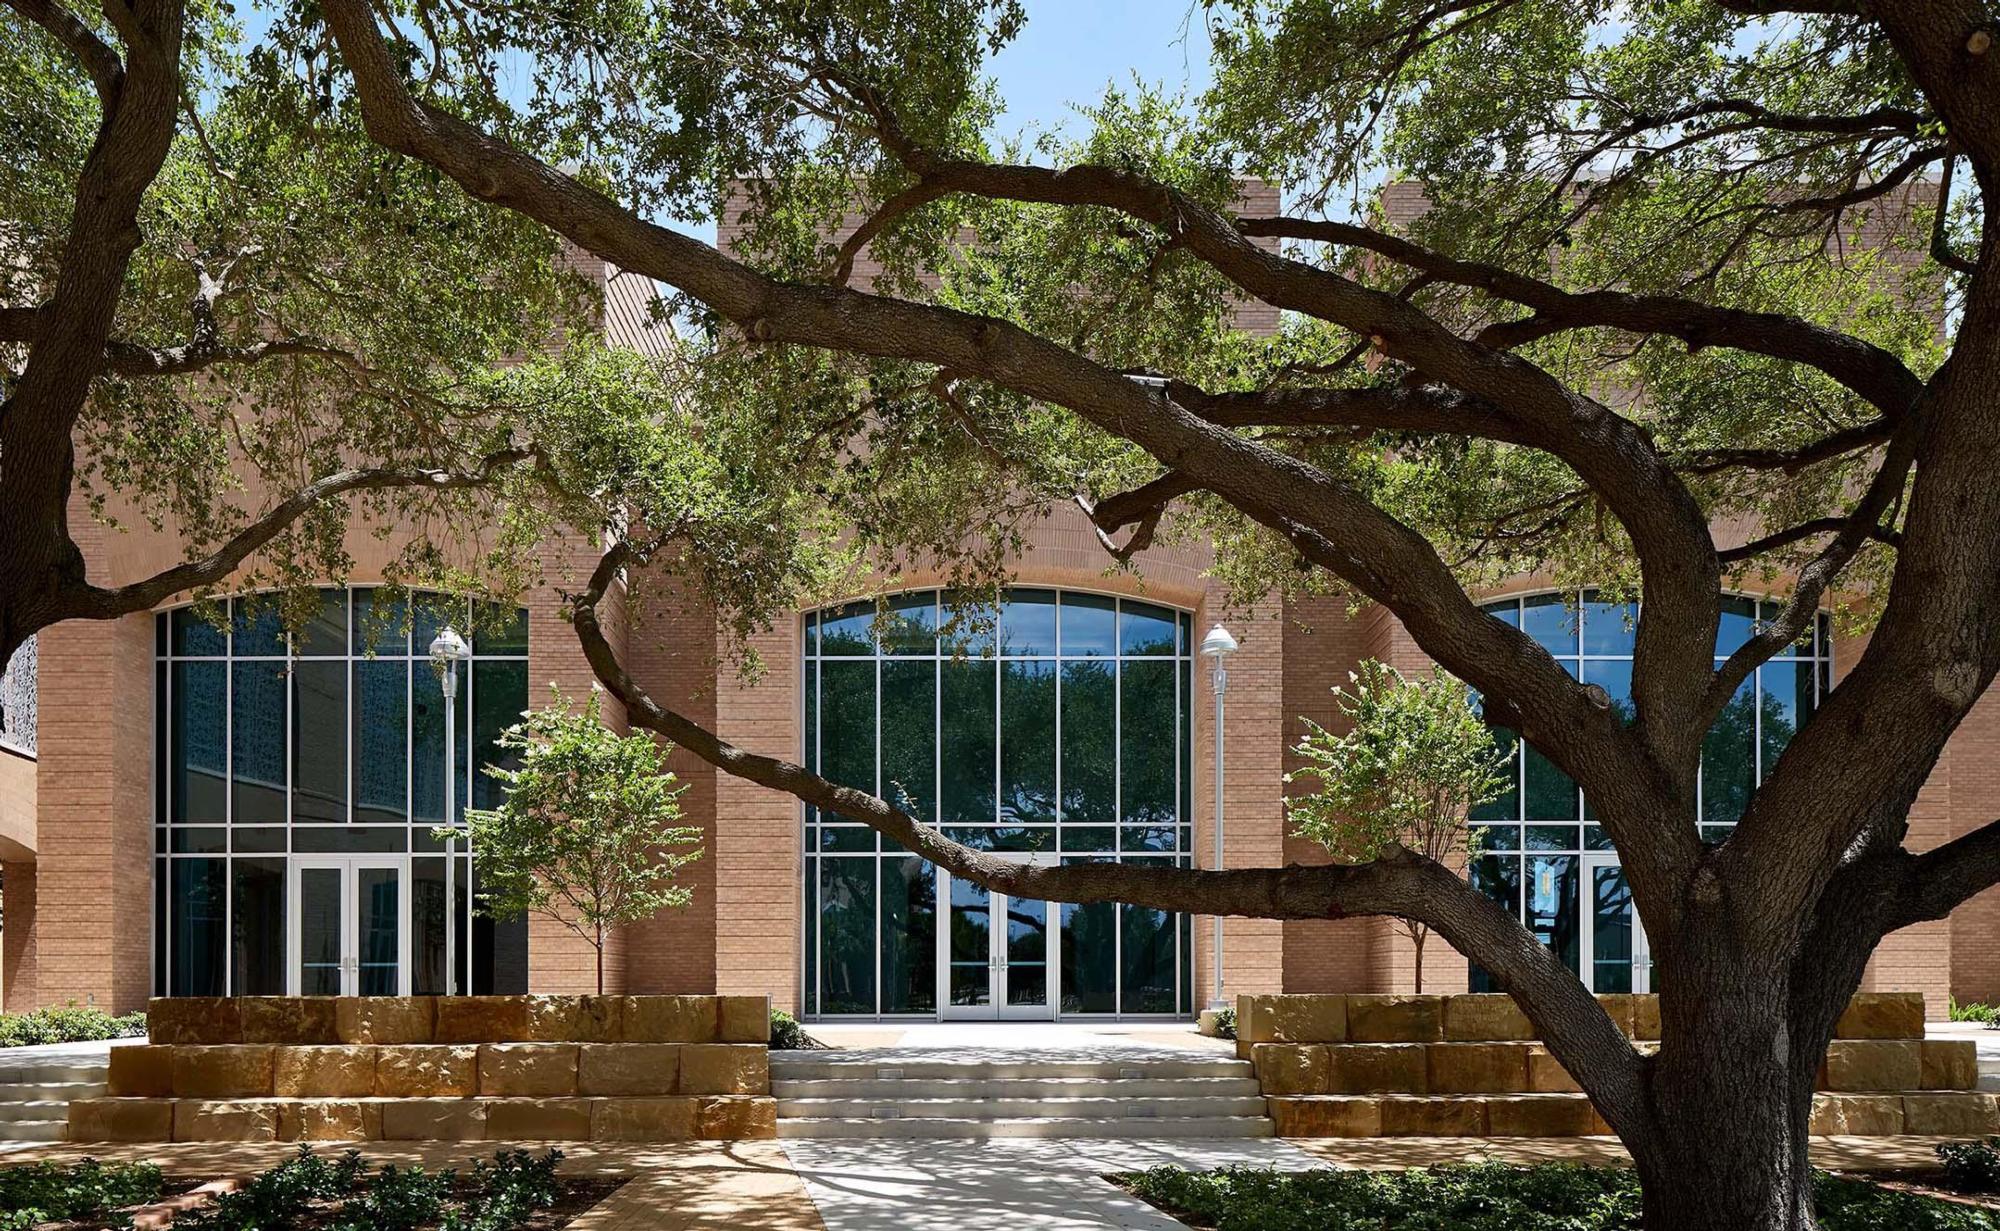 Image of a many-limbed oak tree shelters the front of the red bricked South Texas Medical University building